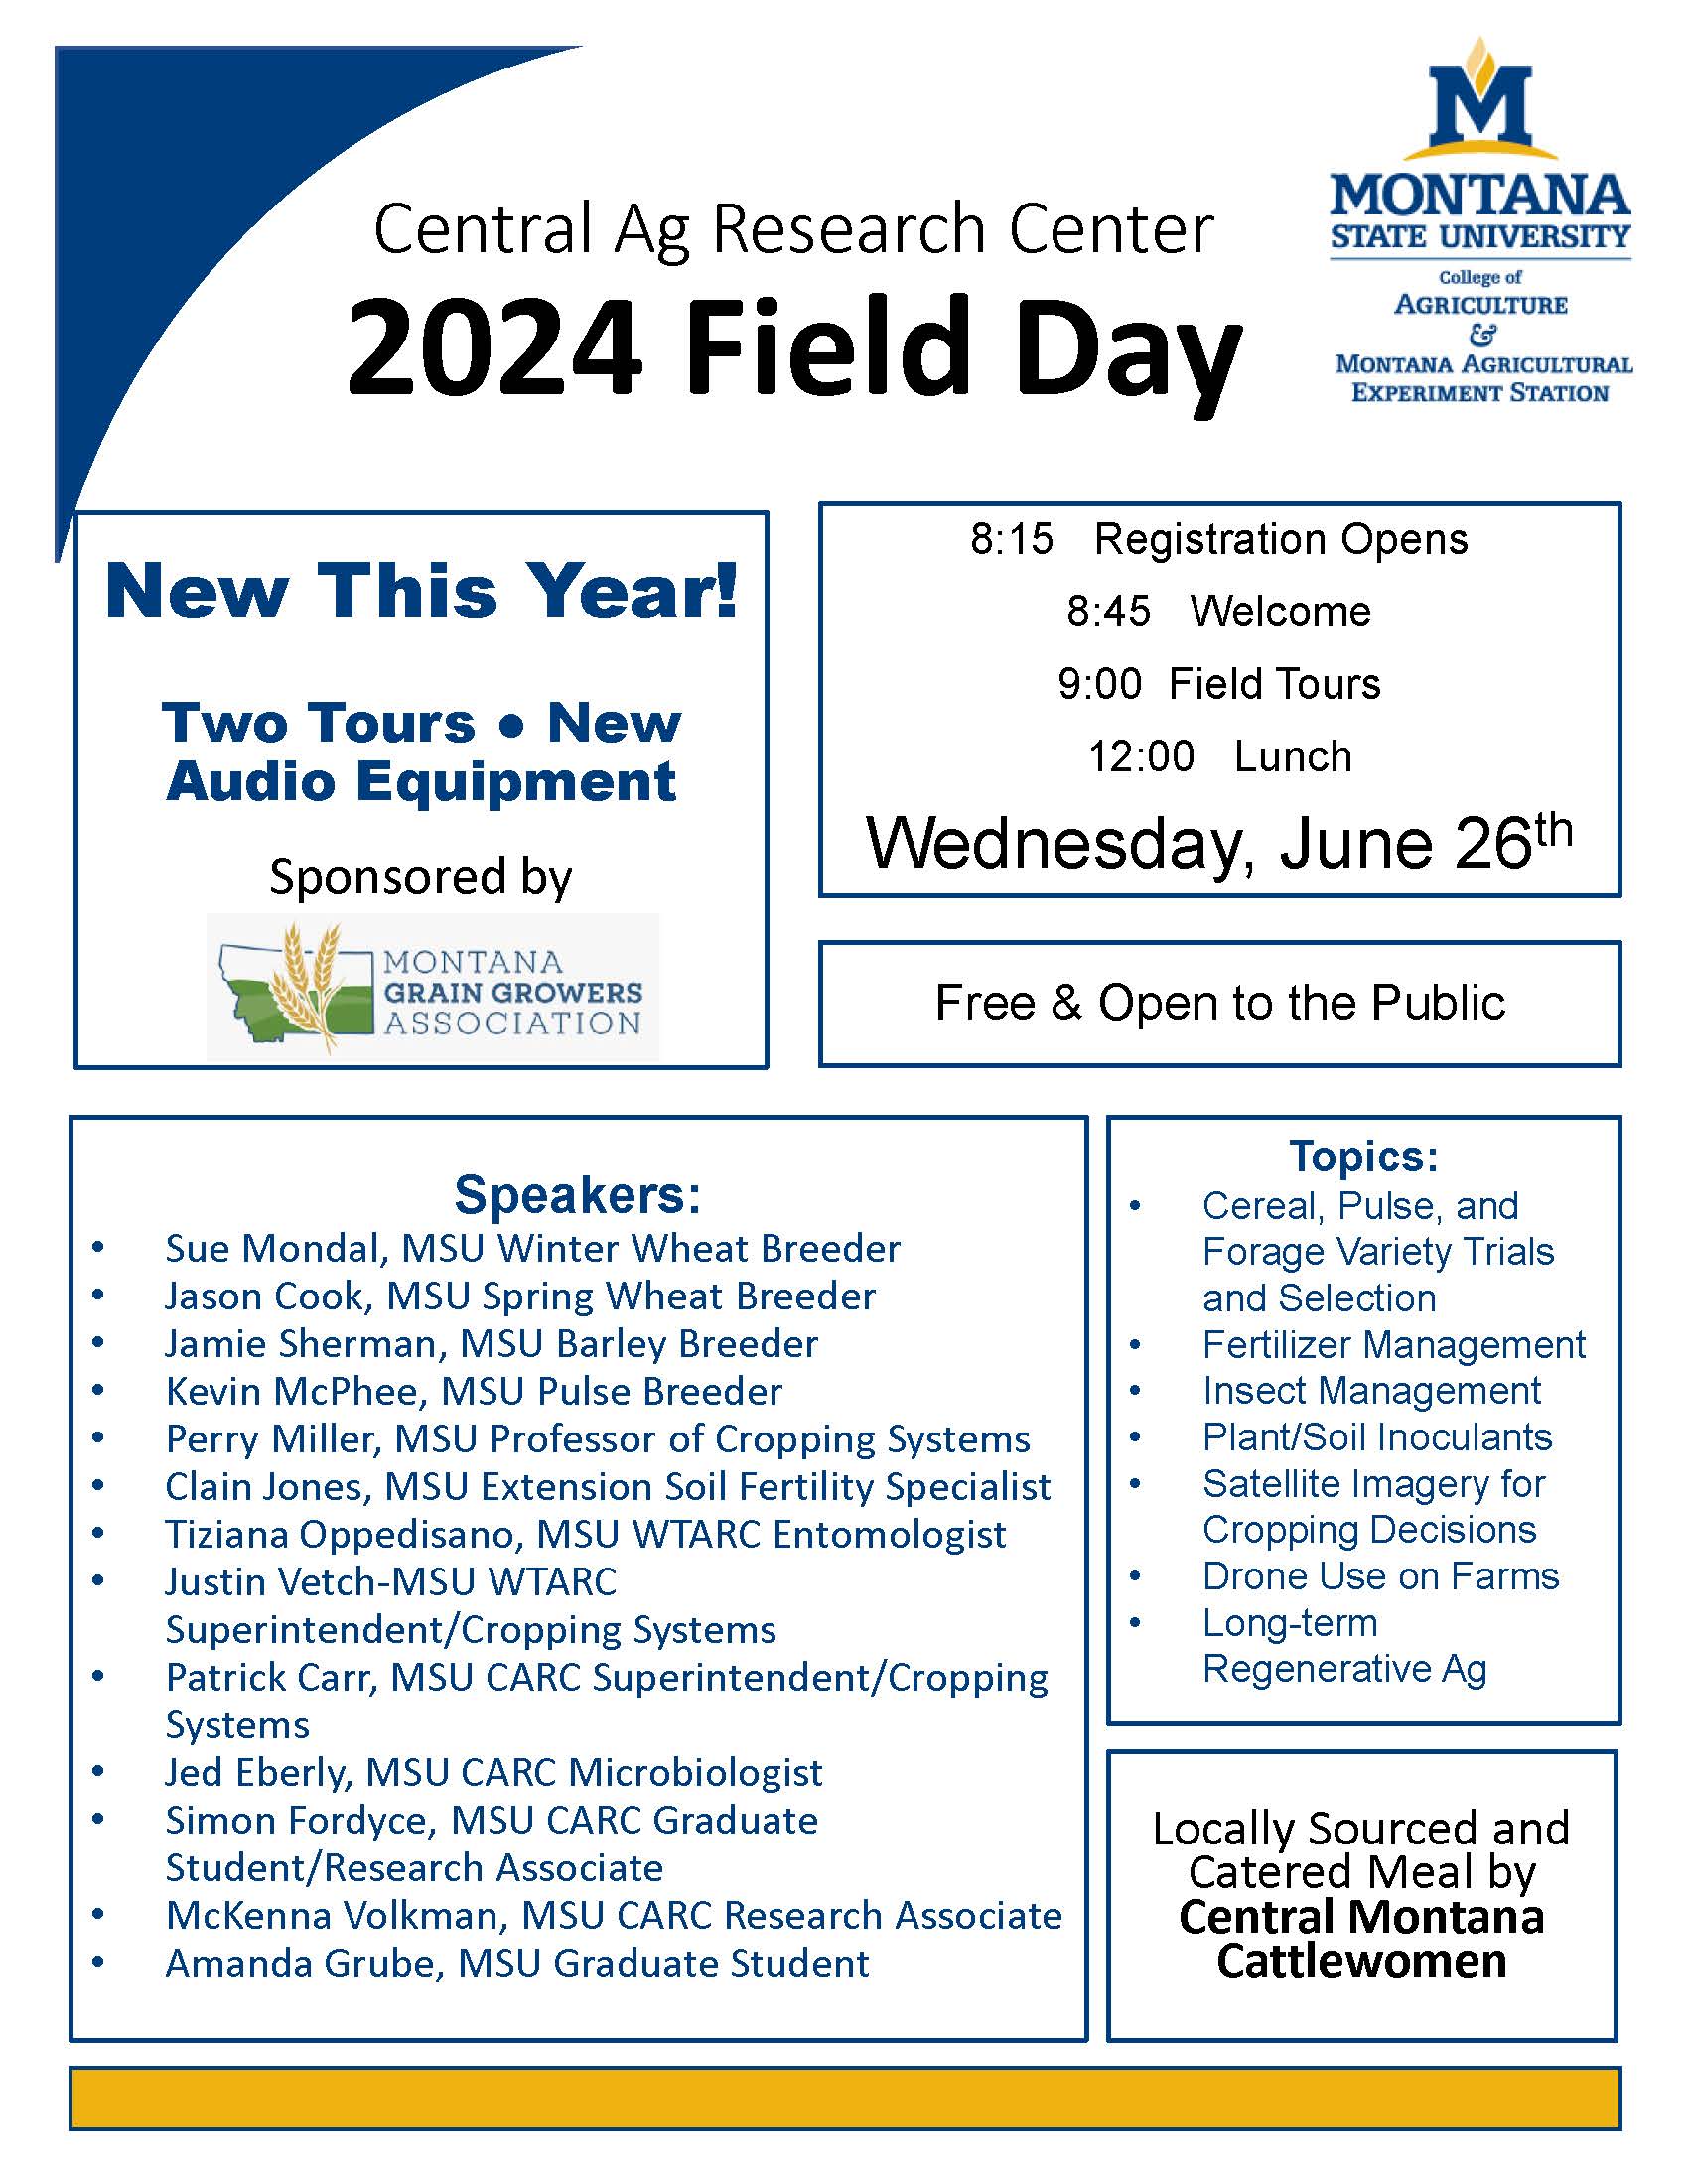 CARC's 2024 field day will take place June 26th, beginning at 8:15 and ending with lunch at noon.  This event is free and open to the public.  Speakers include MSU crop breeders, CARC faculty and staff, and several MSU faculty specialists in a variety of different topics related to central Montana farms.  There will be two tours and we have brand new audio equipment.  A locally sourced meal will be provided by Central Montana Cattlewomen.  